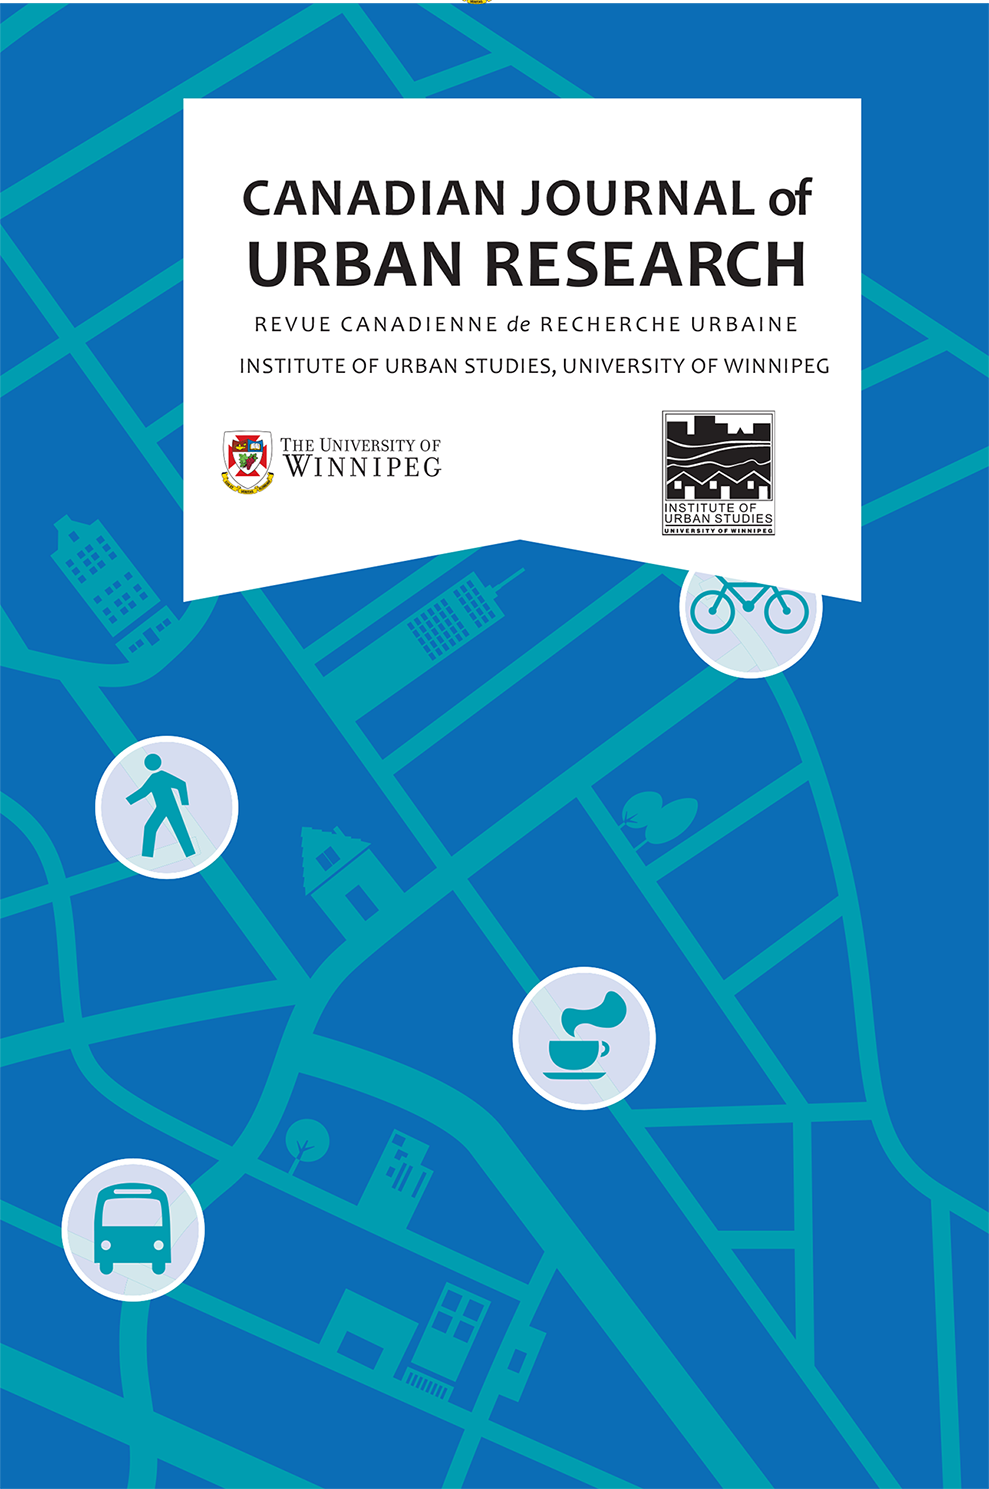 					View Vol. 29 No. 1 (2020): Canadian Journal of Urban Research - Summer 2020 Issue
				